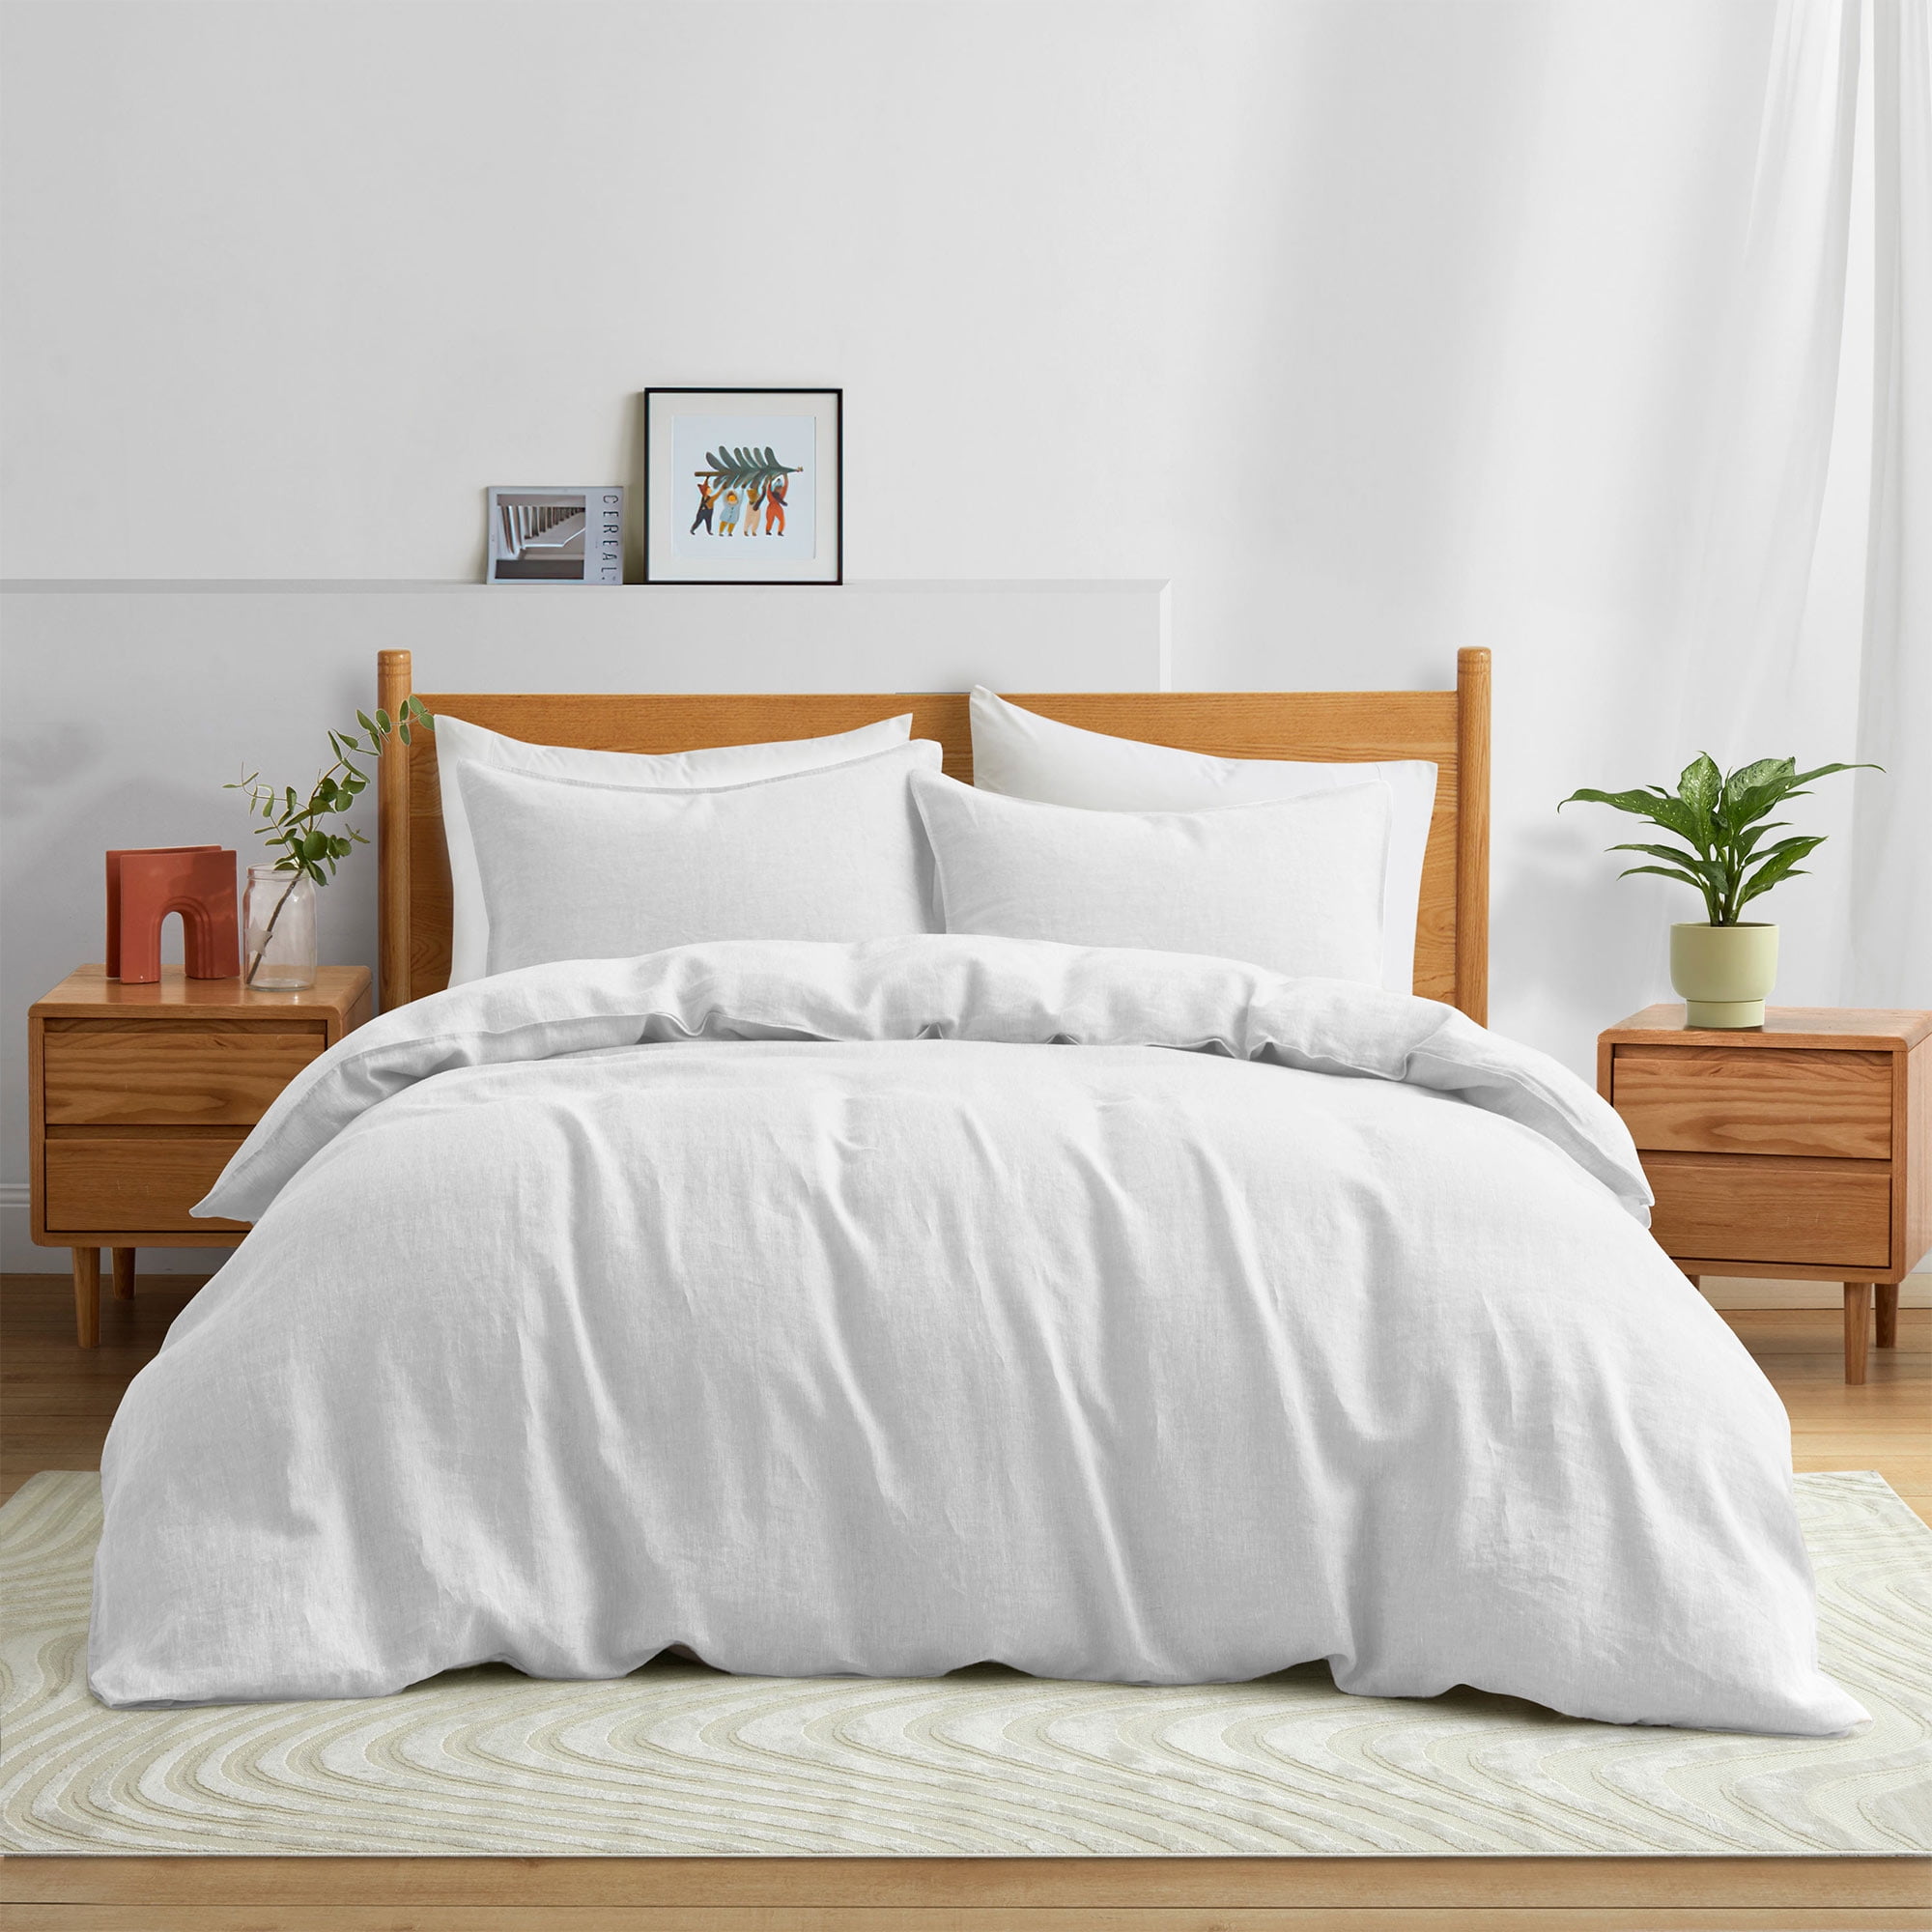 Smart Bedding's Linen Sheets Snap to the Duvet Cover